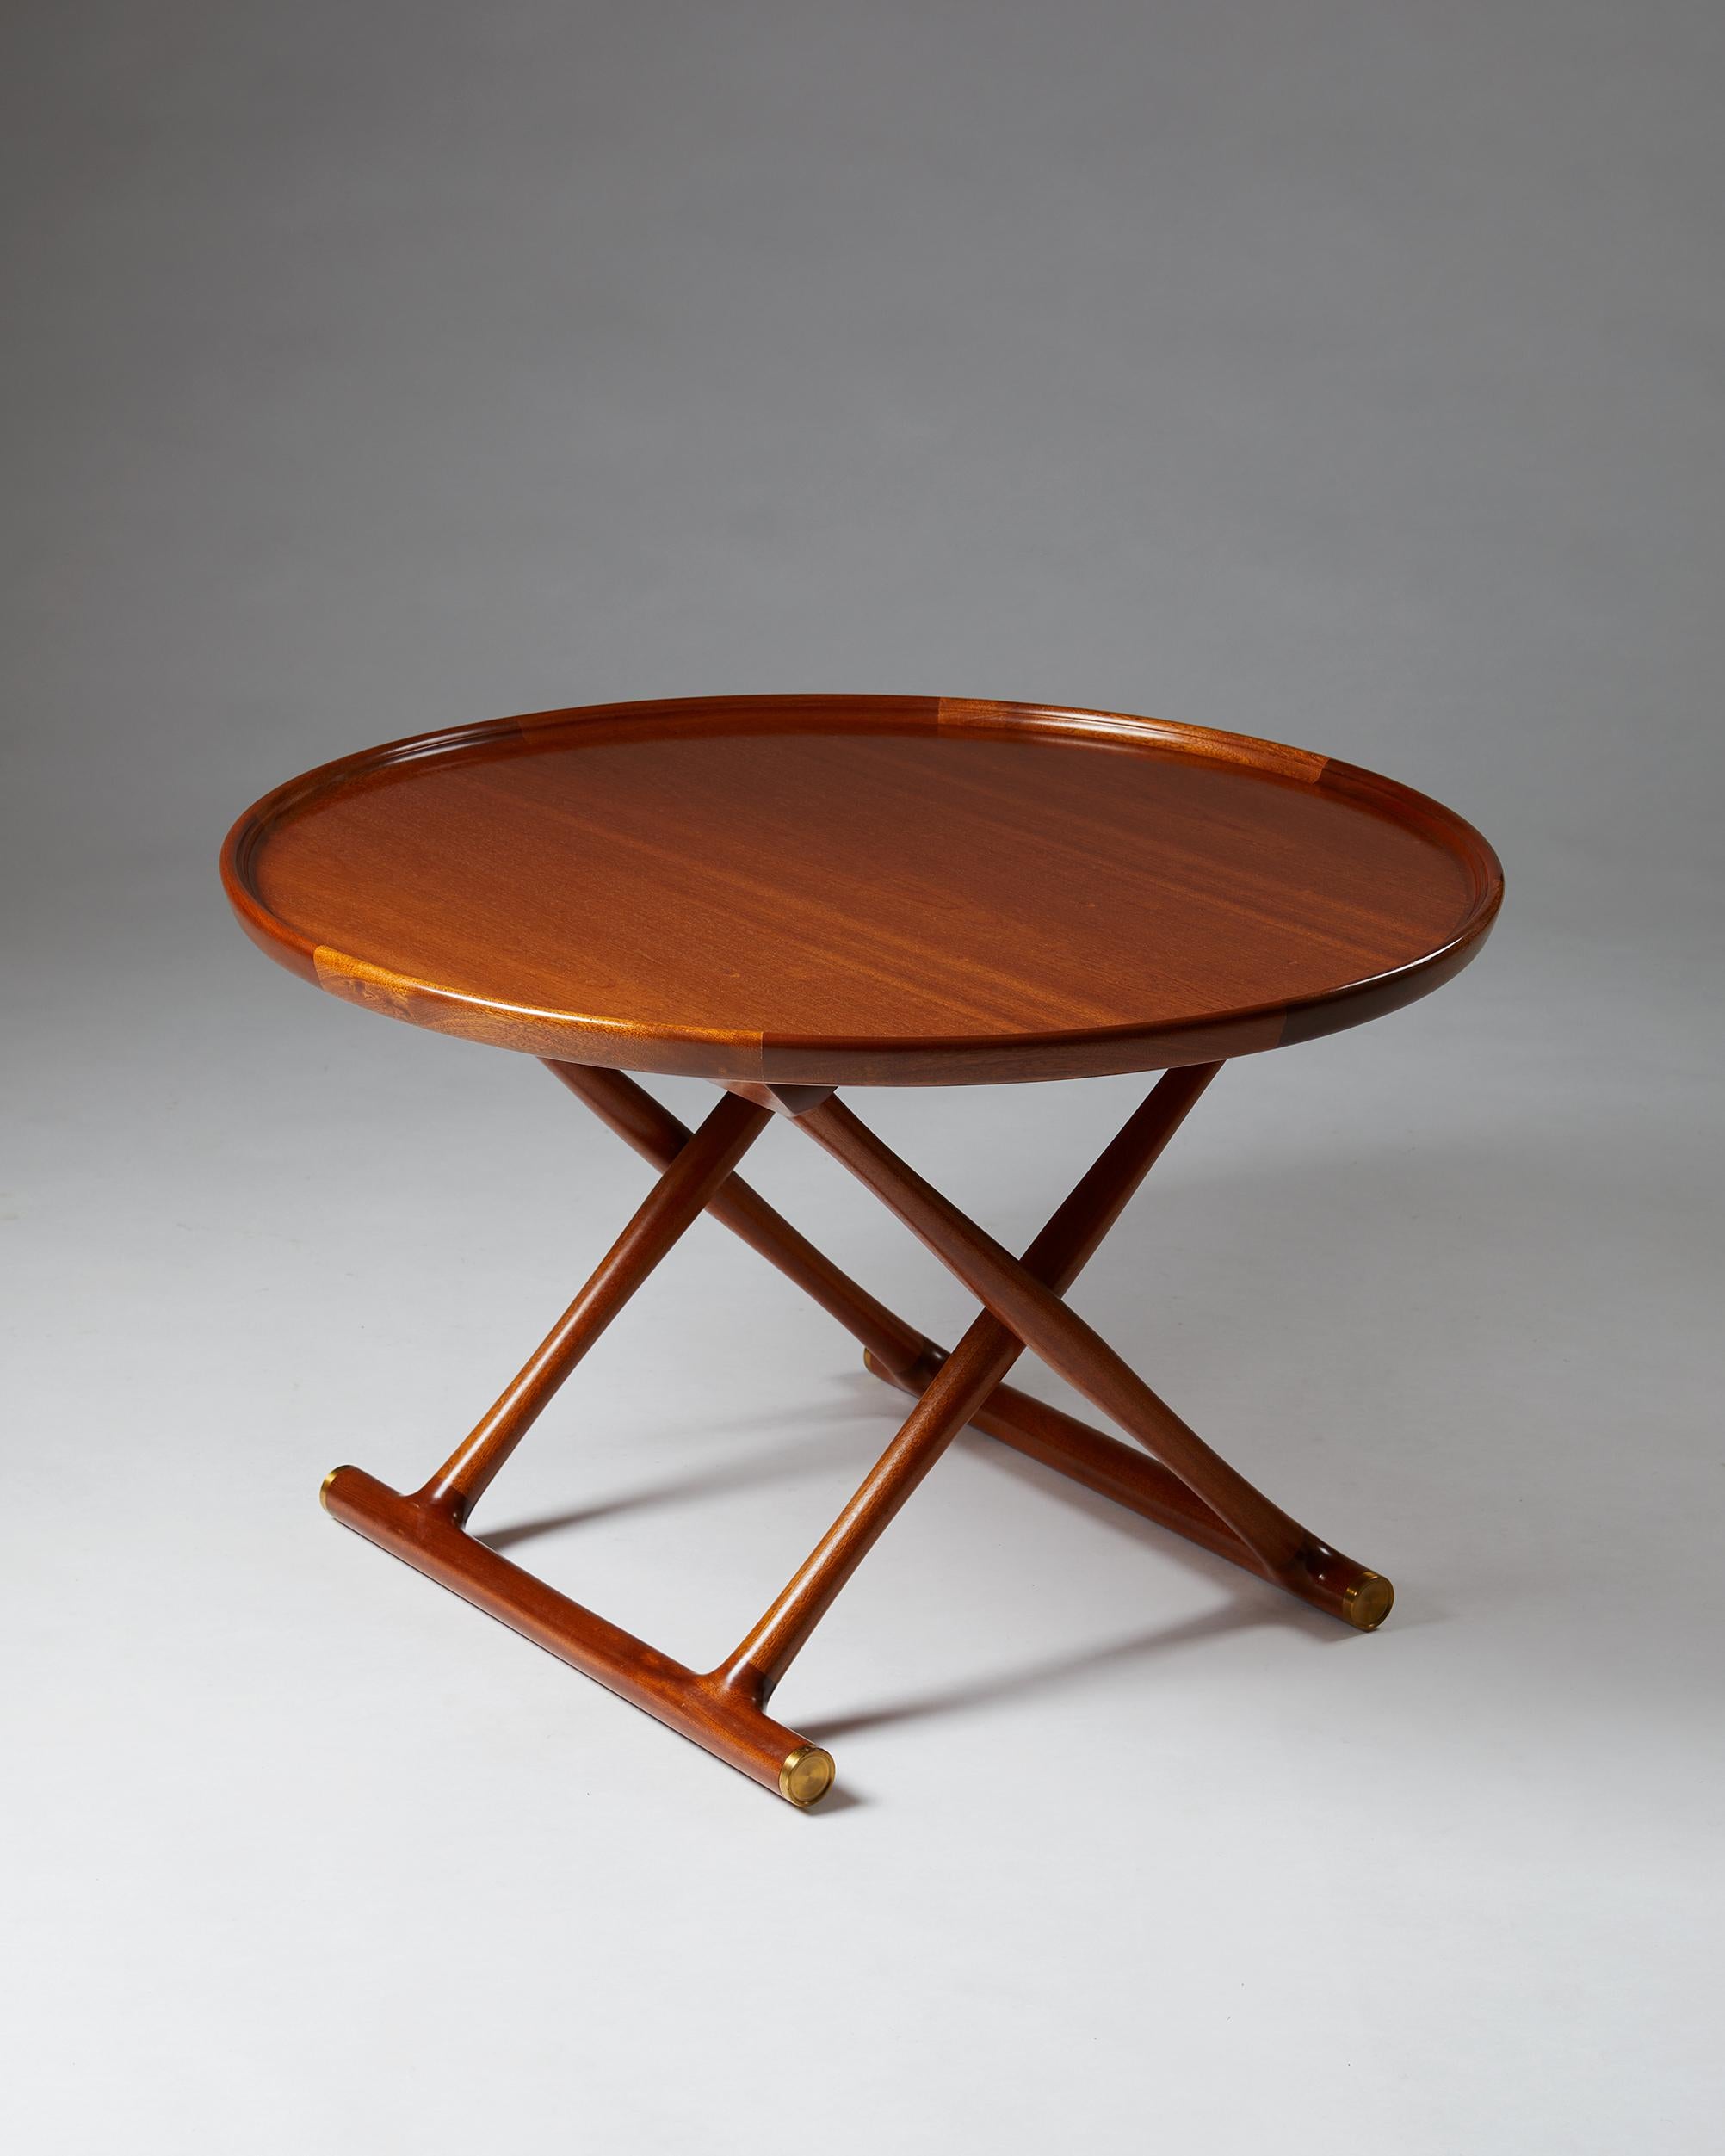 Danish Occasional Table “The Egyptian table”, Designed by Mogens Lassen